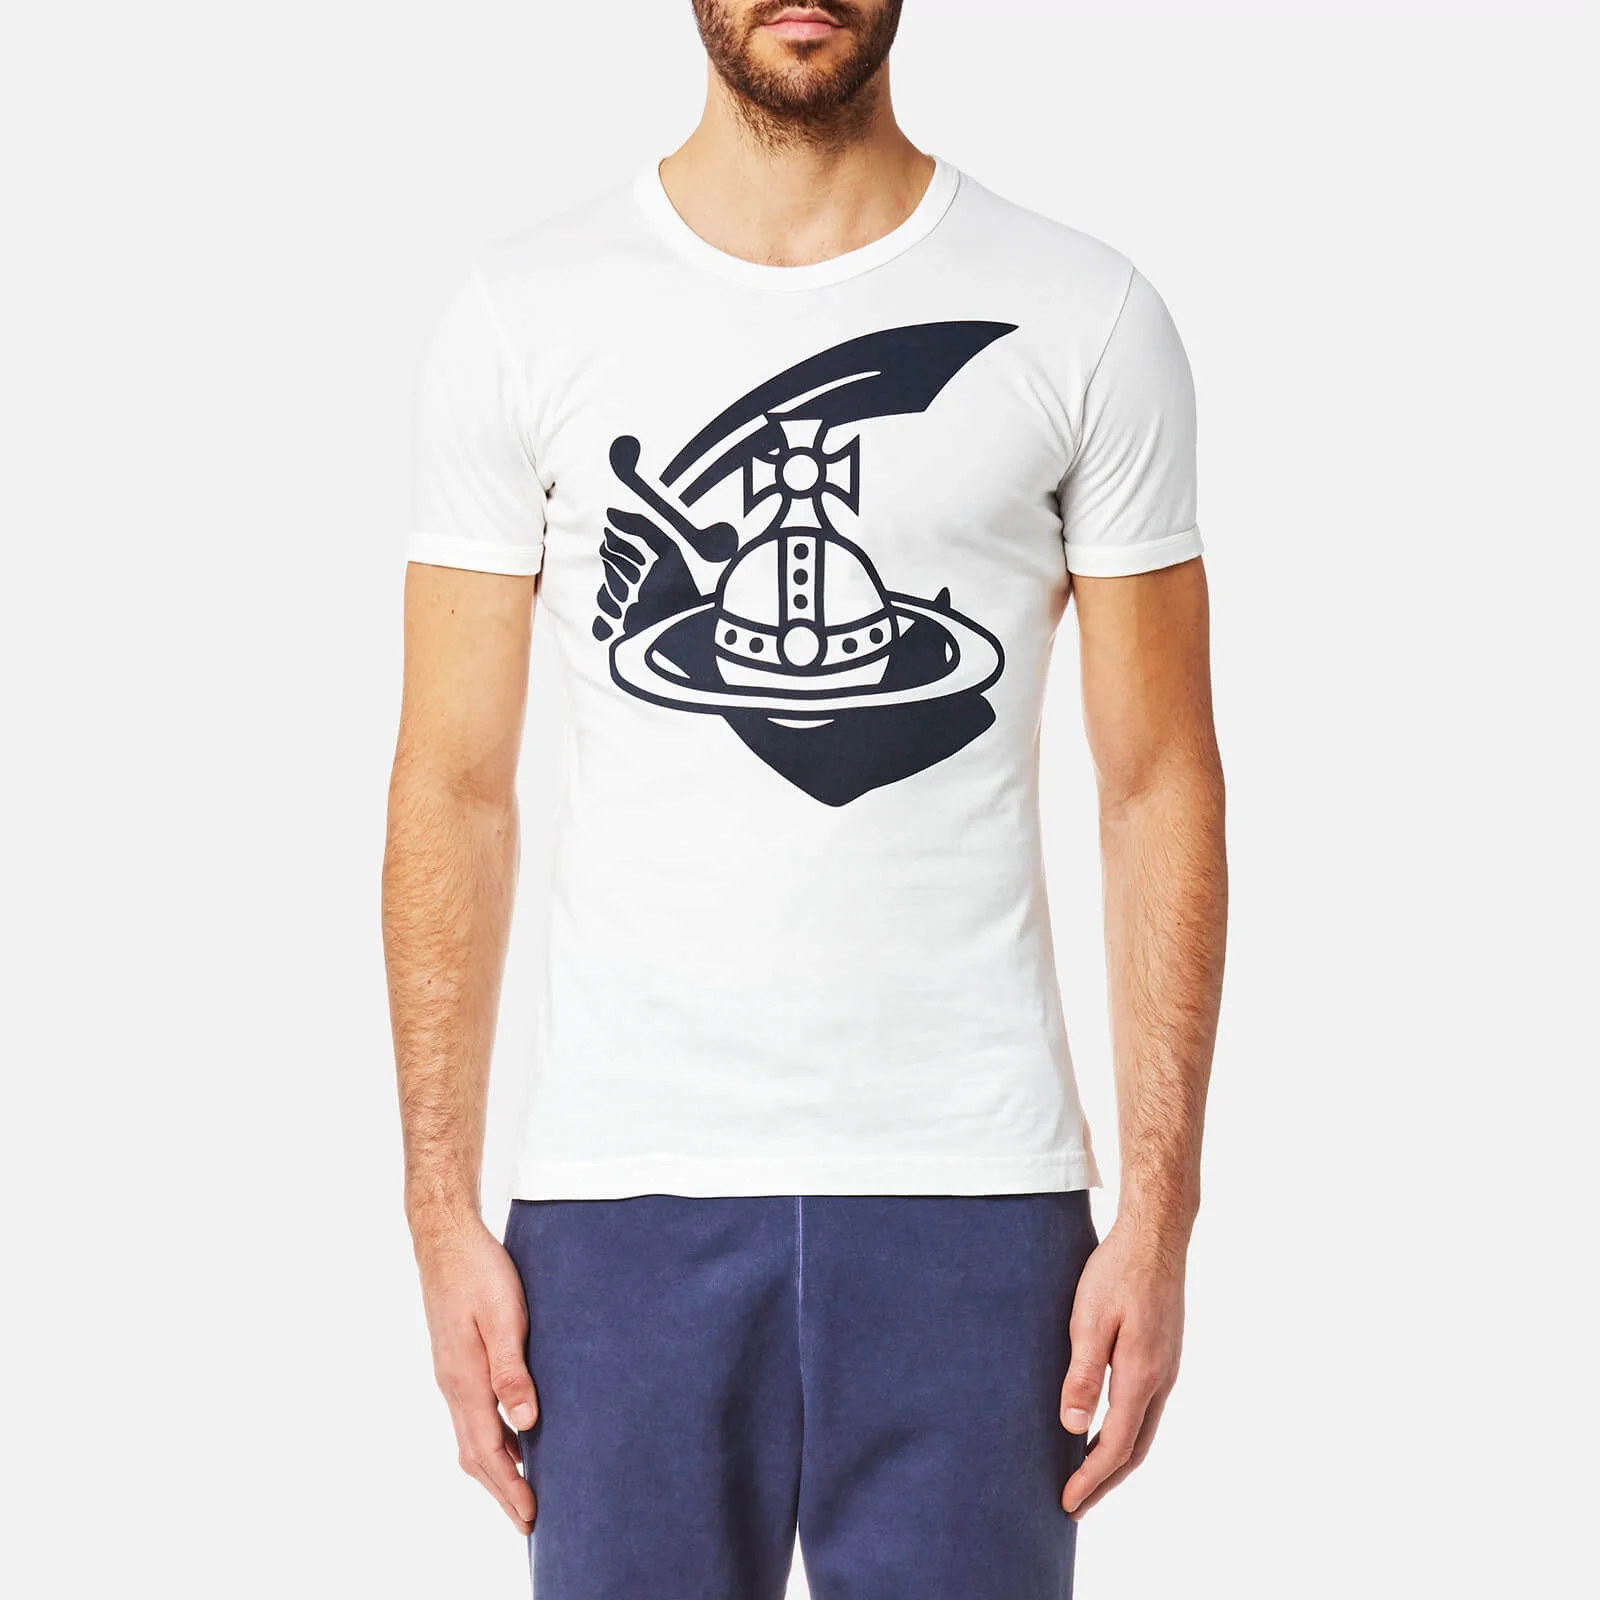 Vivienne Westwood Anglomania Men's Classic T-Shirt - Navy/White Image 1